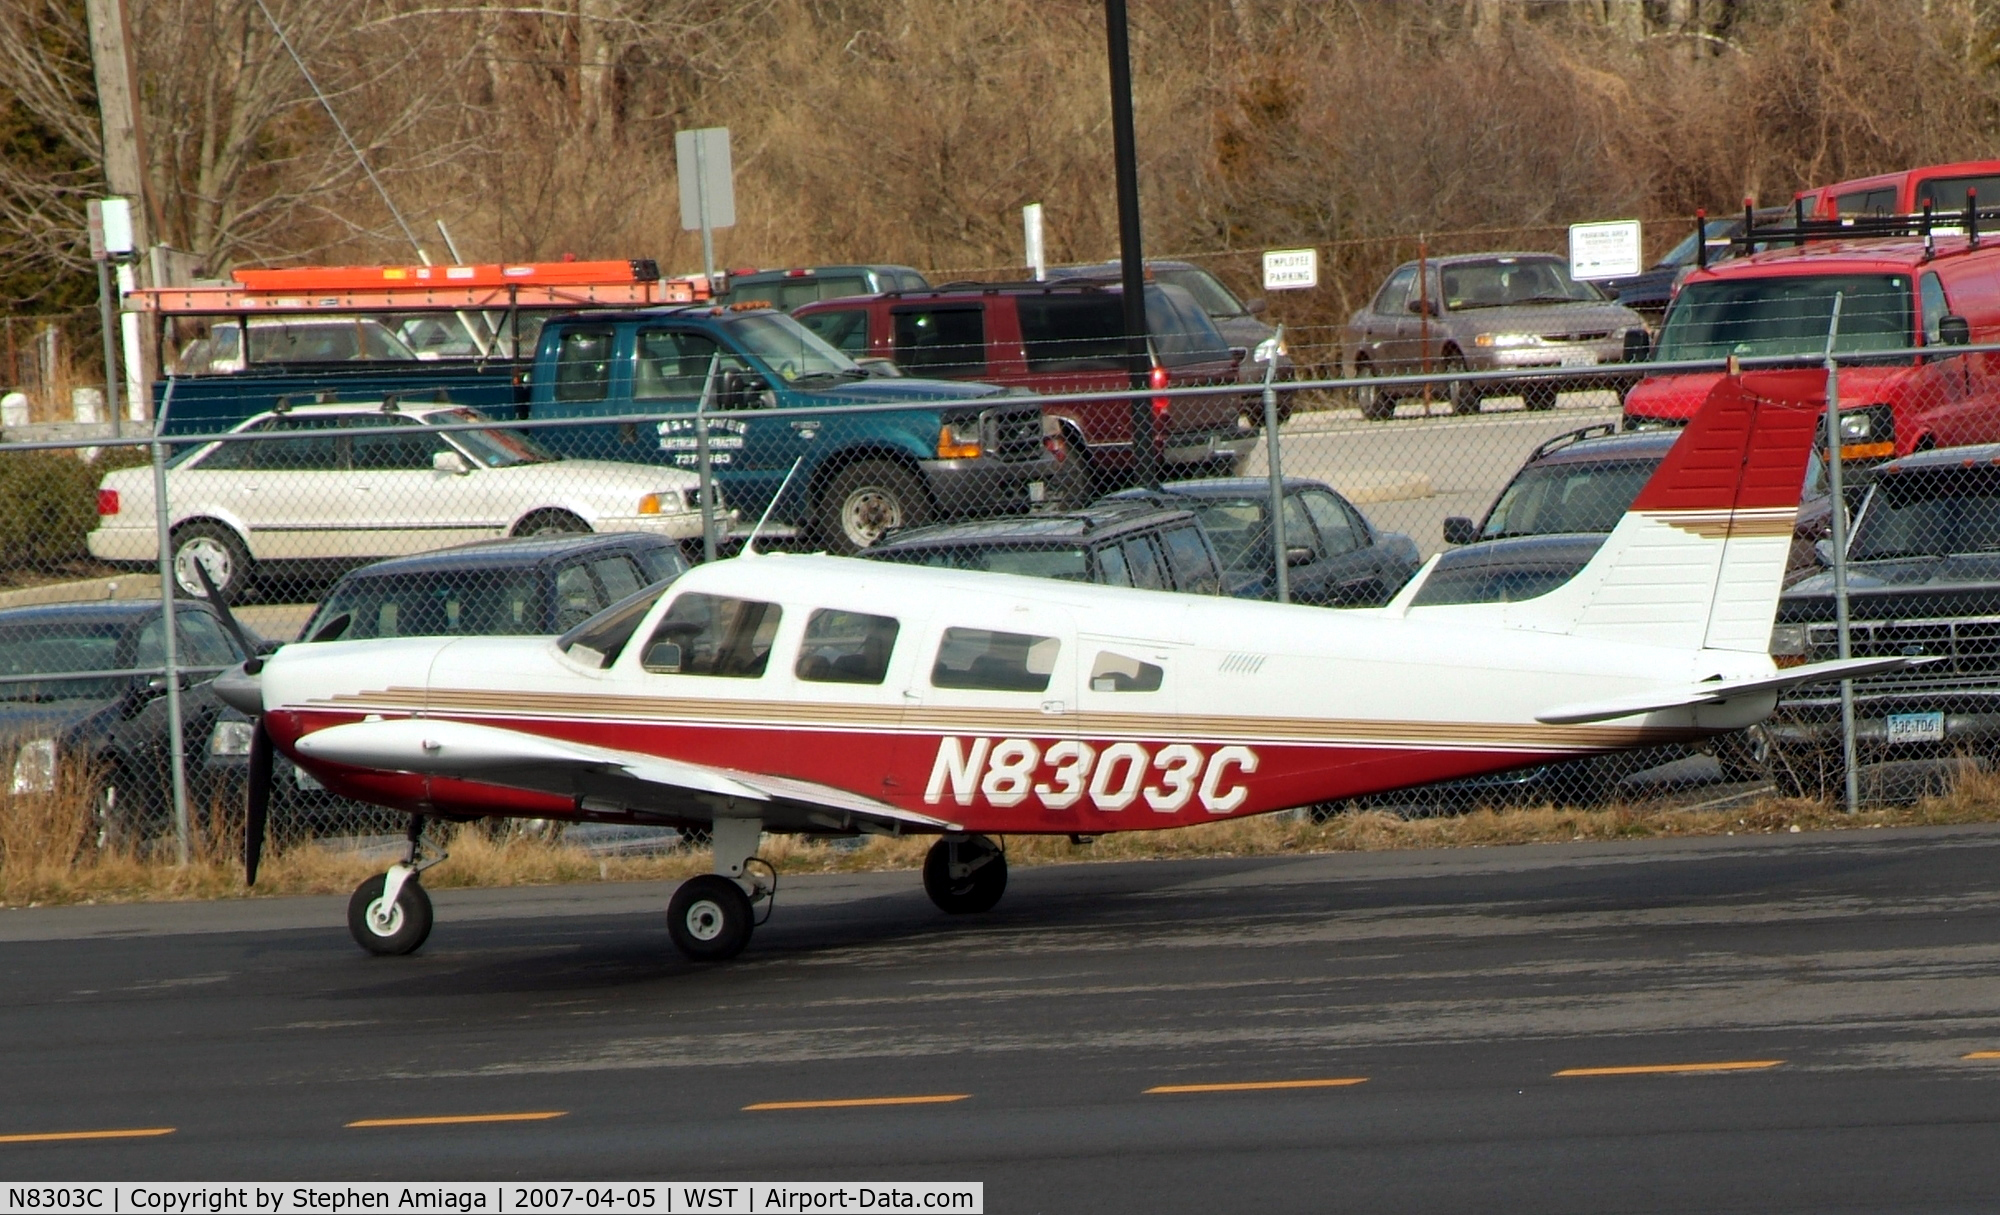 N8303C, Piper PA-300 Twin Comanche, Cherokee Six at the Loading Area - NE Airlines